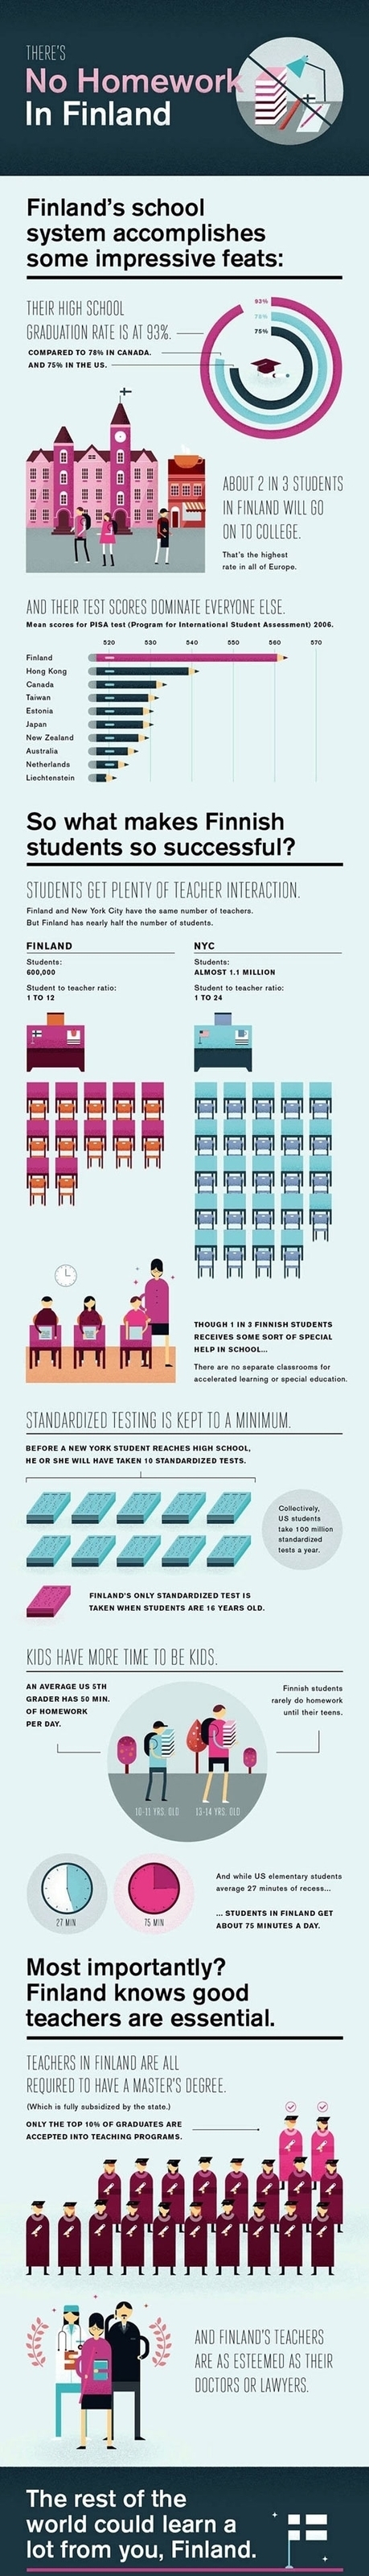 There's no homework in Finland (infographic) | 21st Century Learning and Teaching | Scoop.it